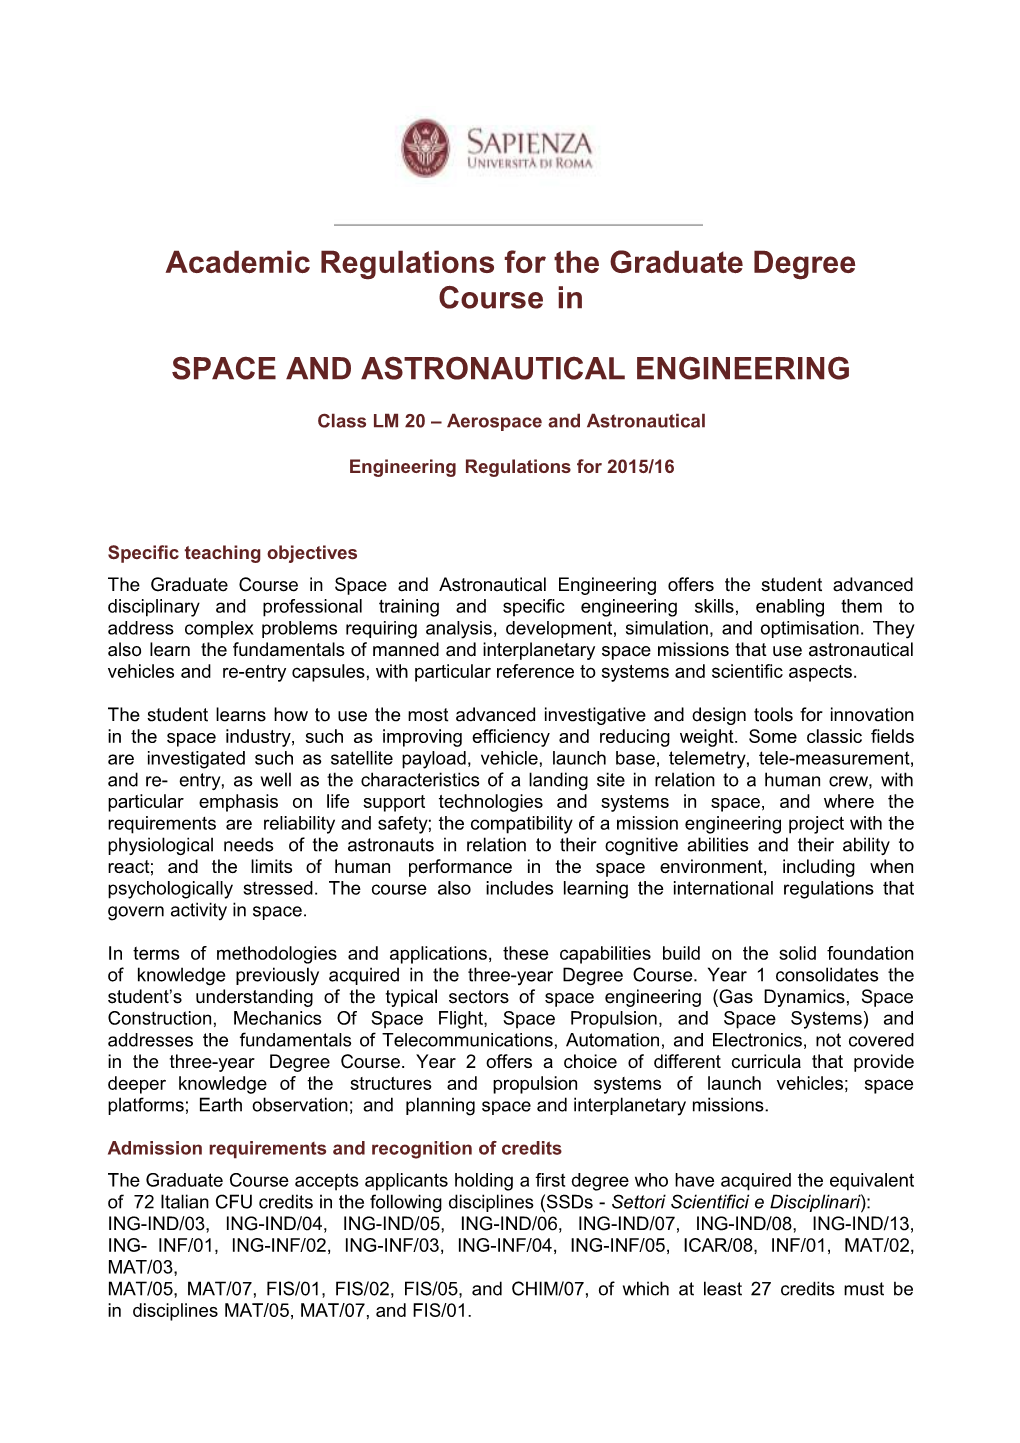 Academic Regulations for the Graduate Degree Course In s1